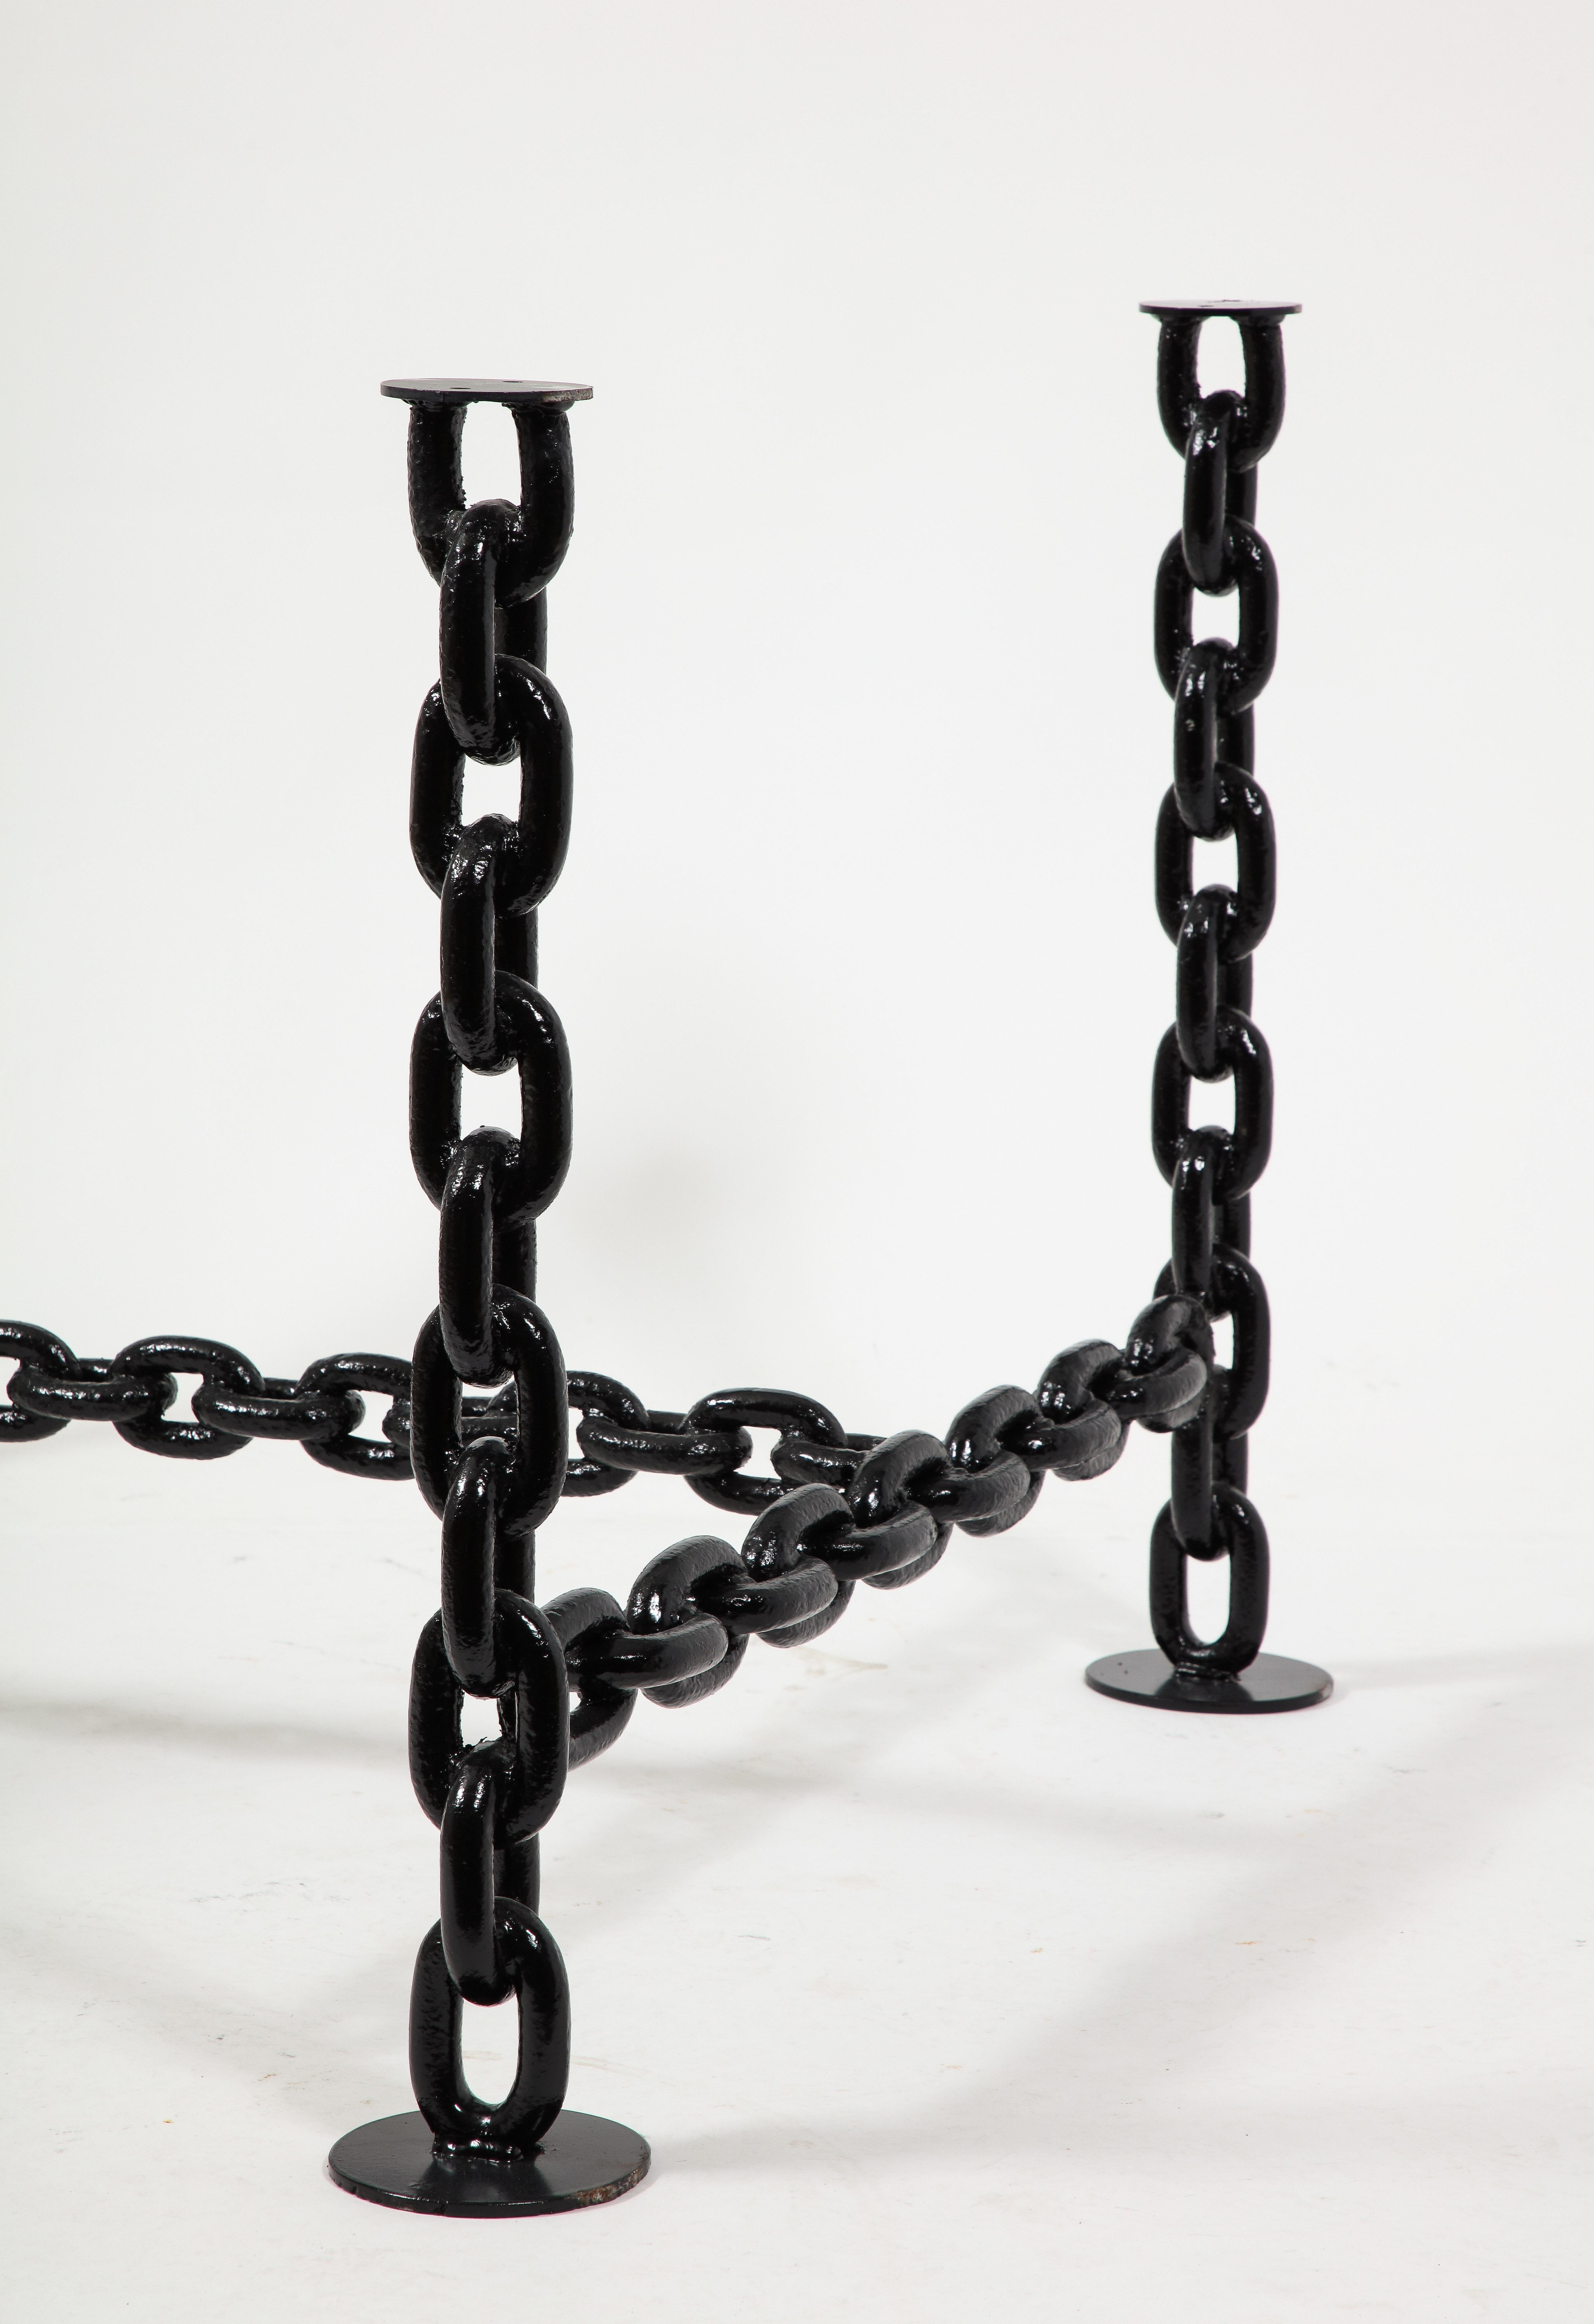 Black Lacquered Brutalist Marine Chains Dining Table Structure - France 1970s For Sale 9